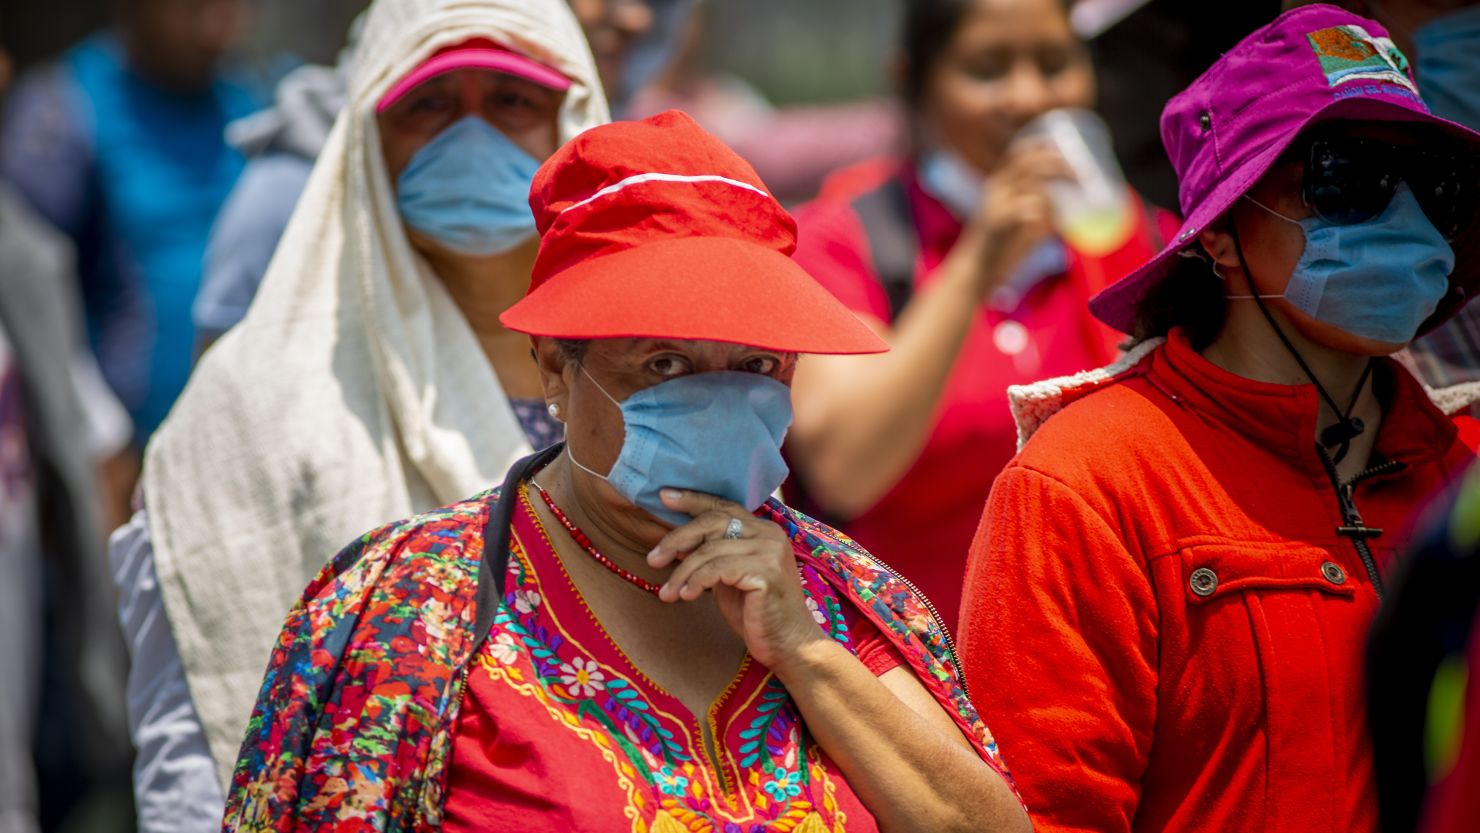 Pedestrians cover their mouths and noses in Mexico City